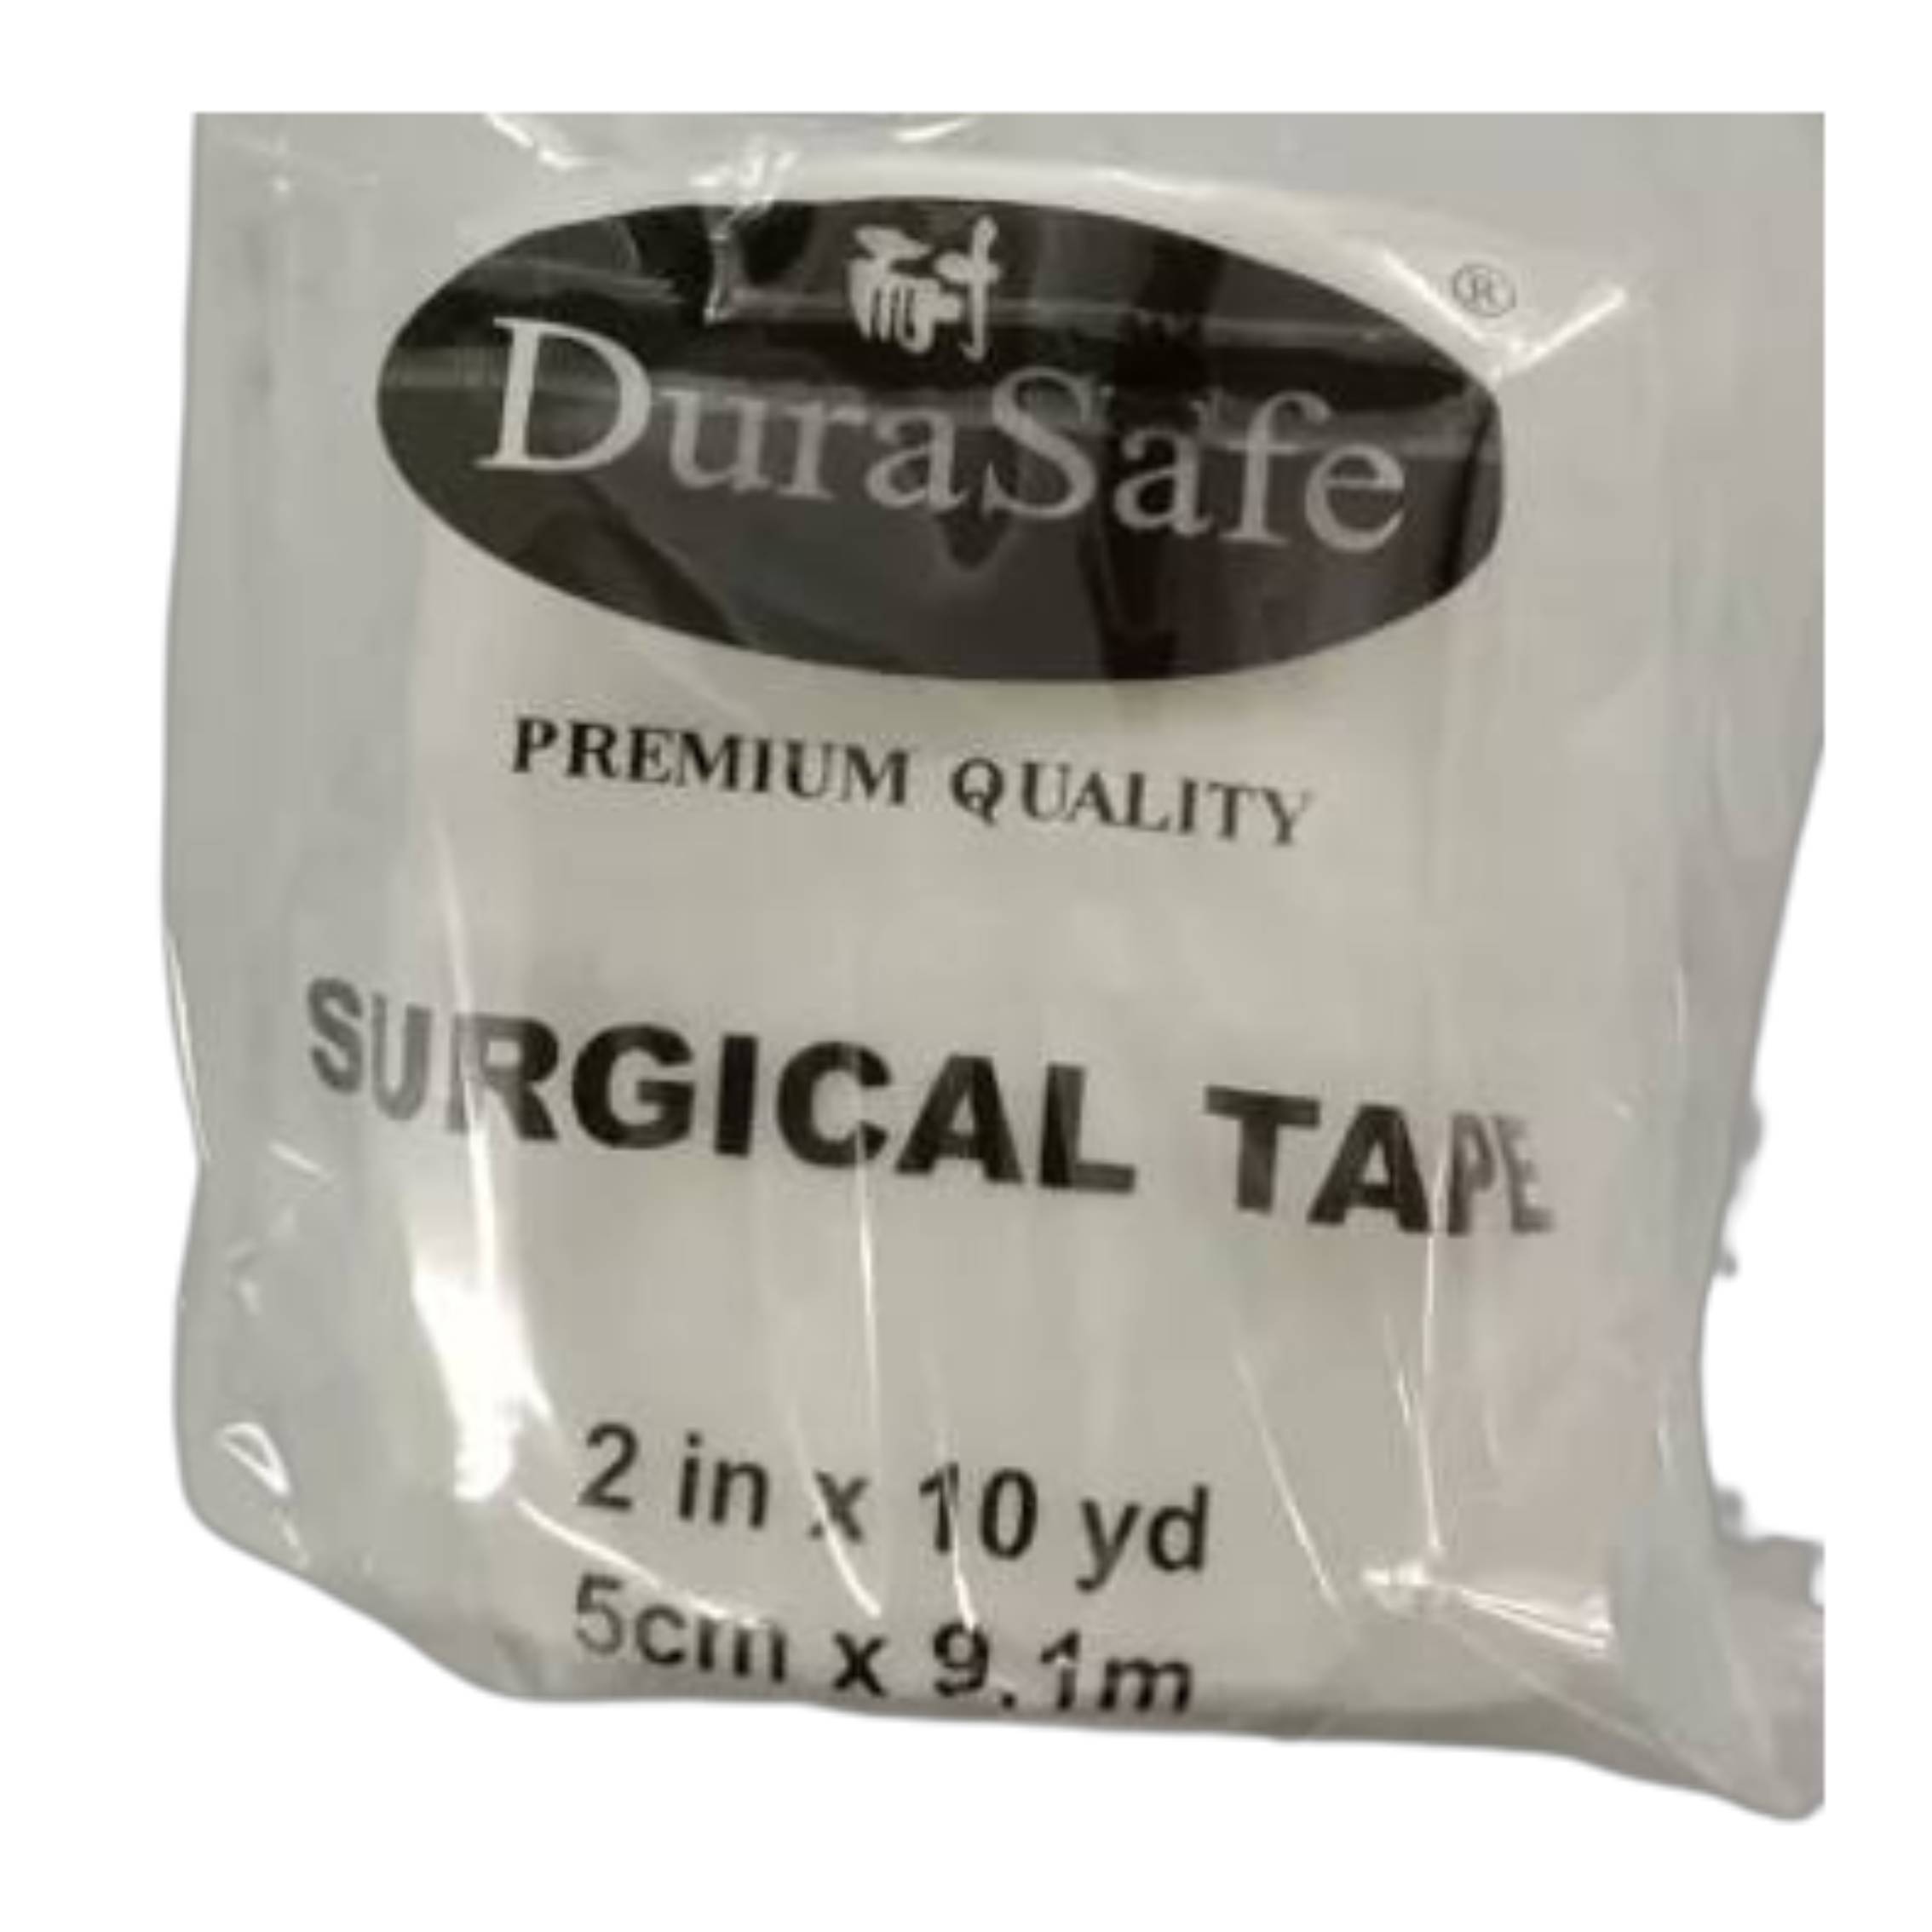 DuraSafe Surgical Tape Without Dispenser 1s 1 inch - DoctorOnCall Farmasi Online